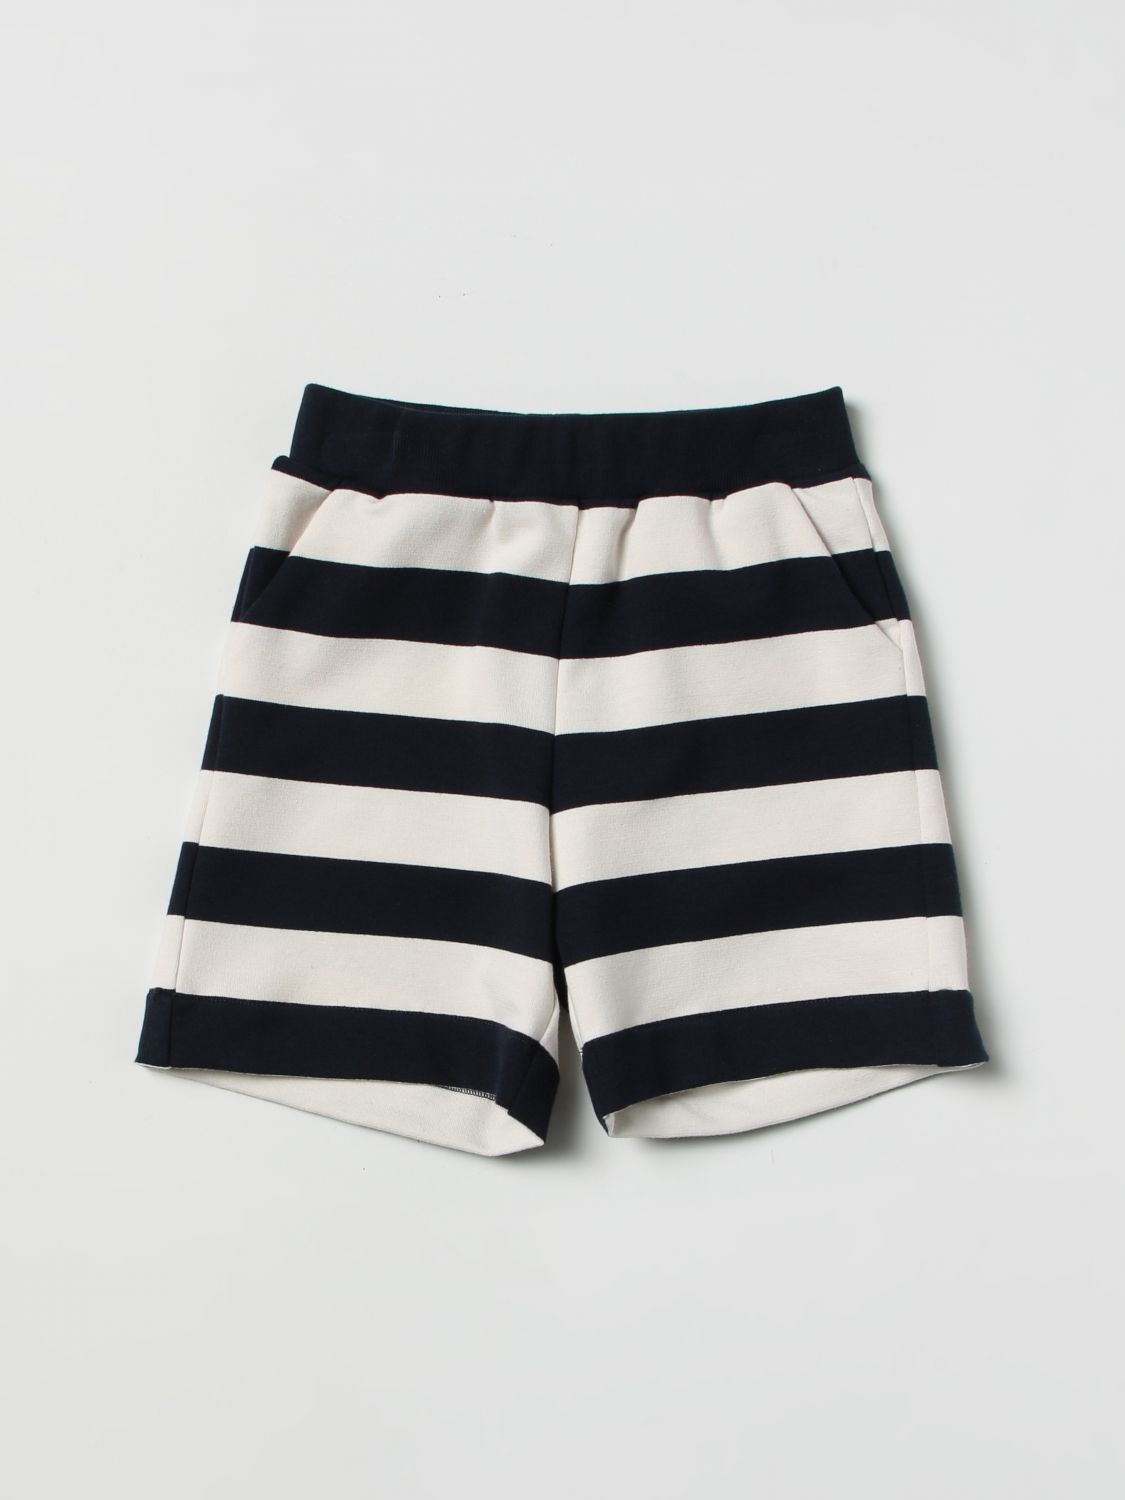 Fay Junior Shorts  Kids Color Ivory